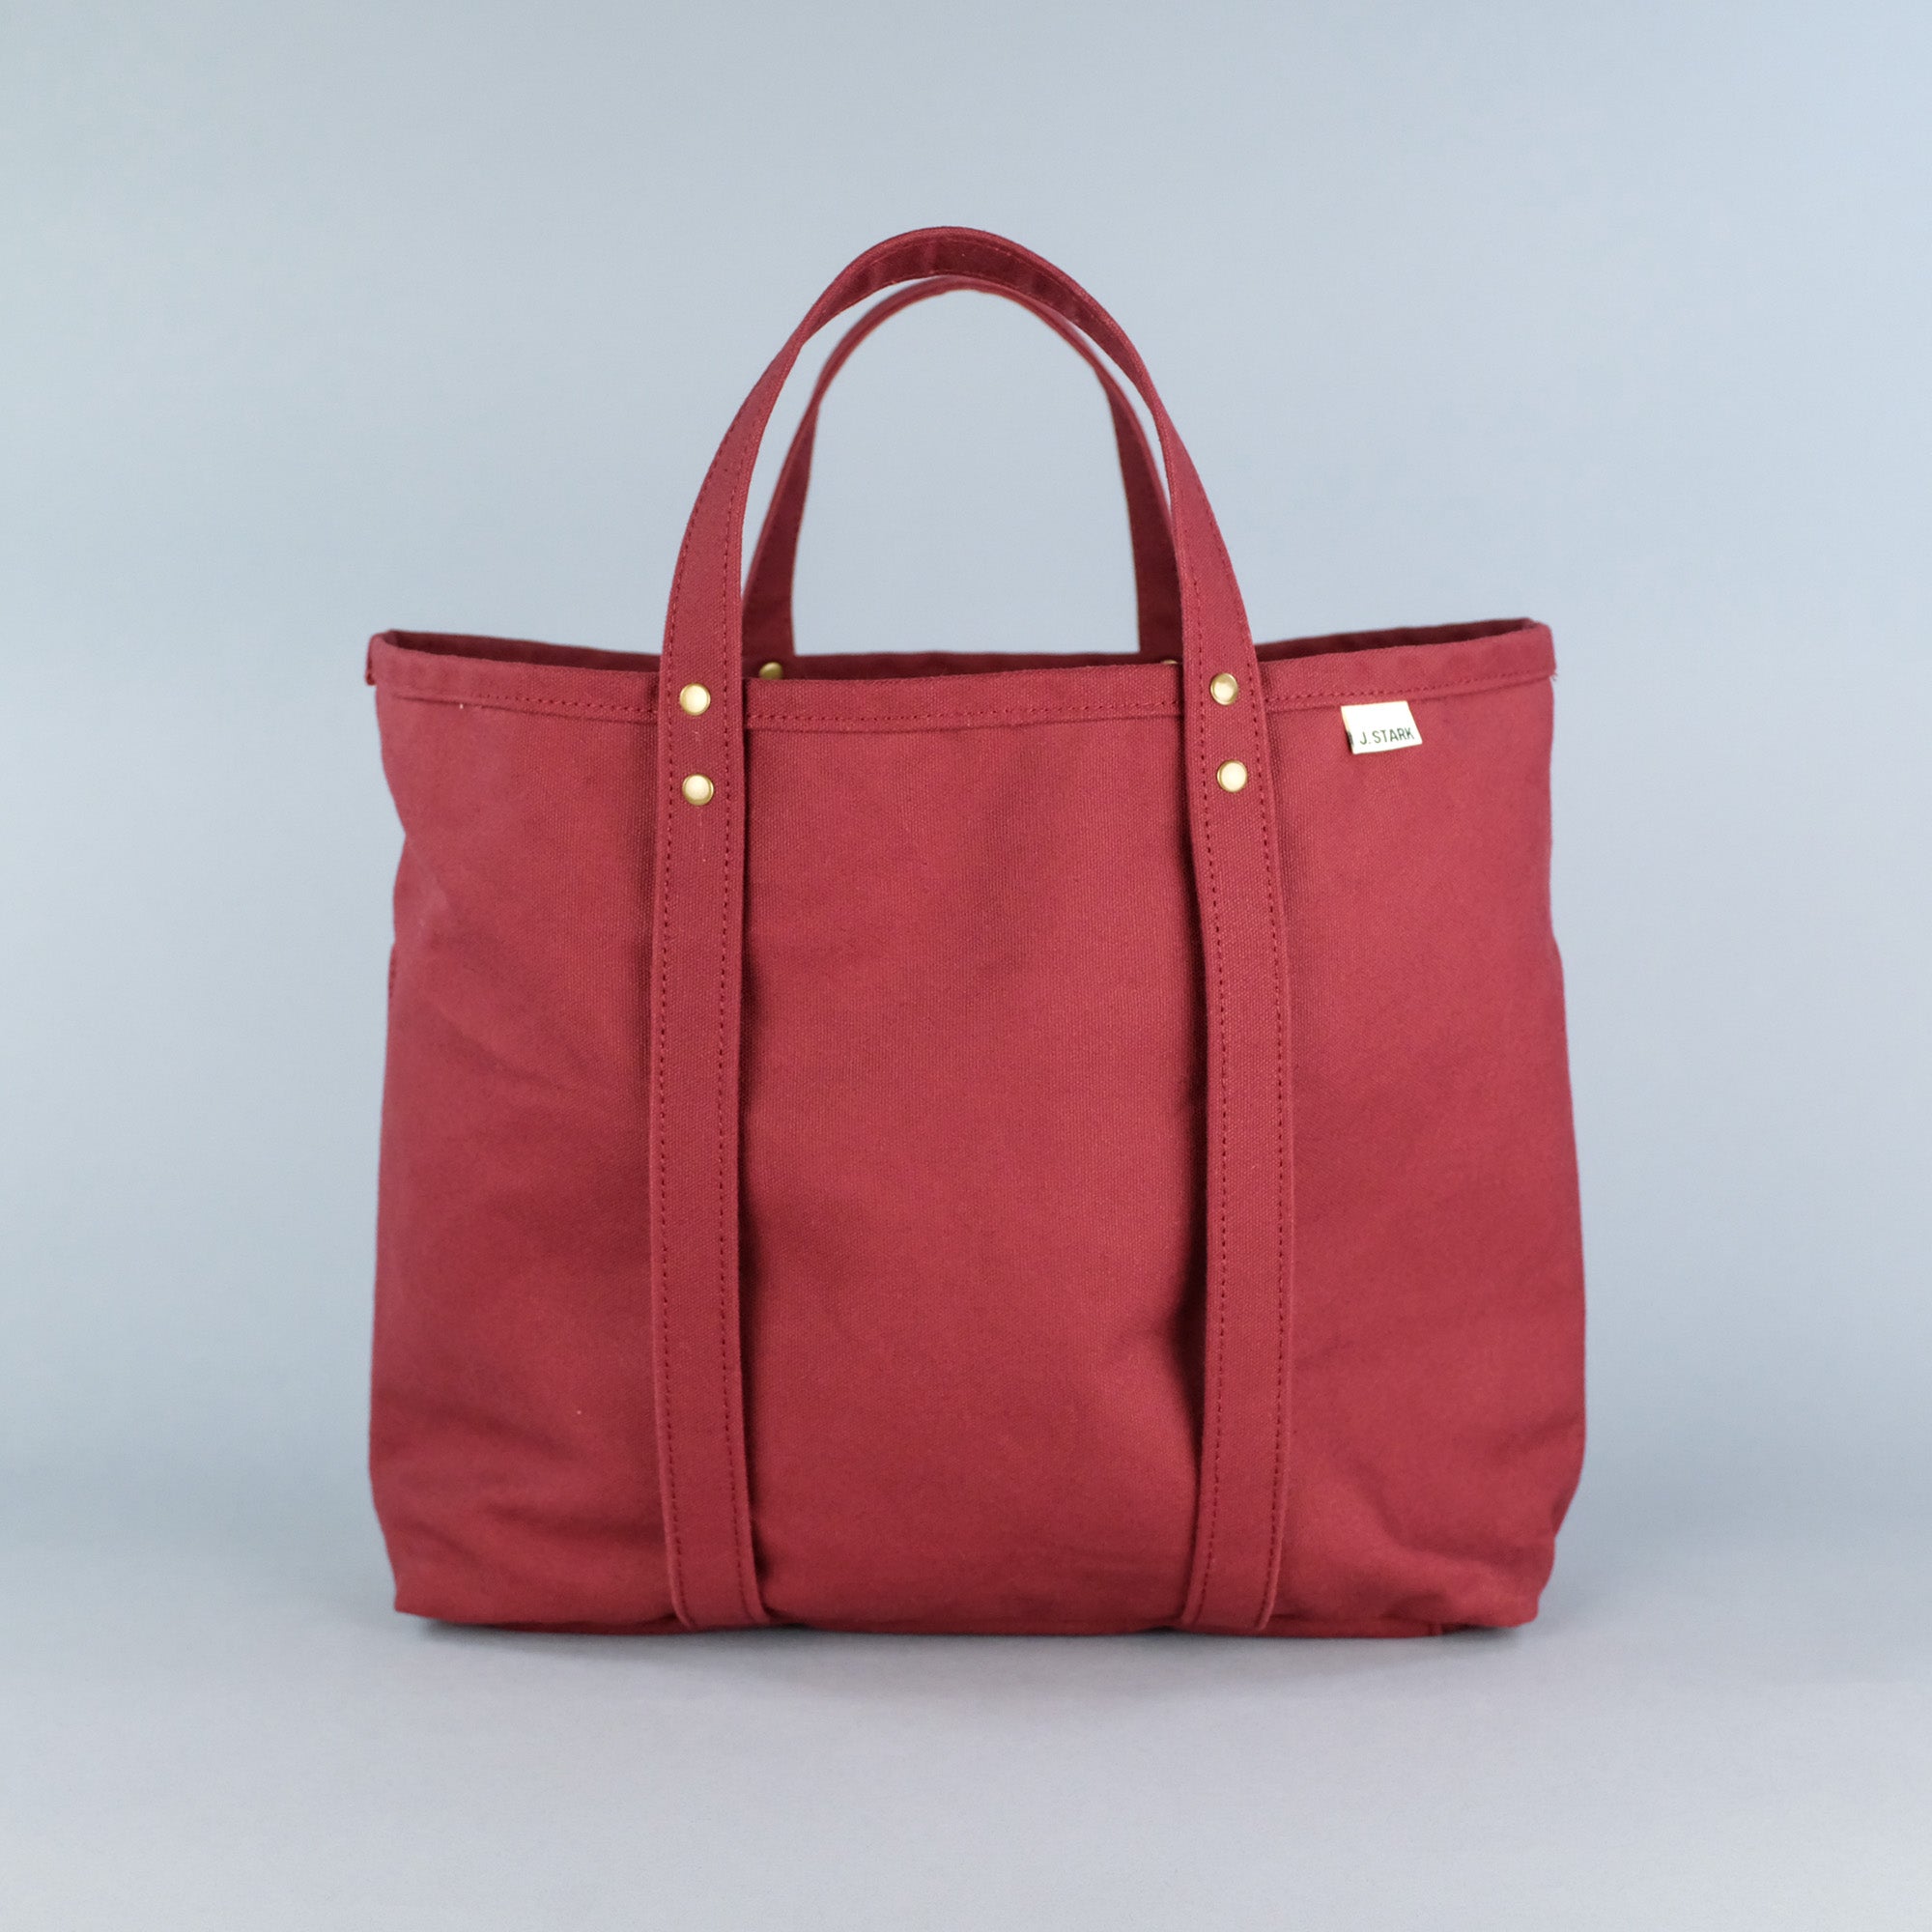 Red leather tote/tool bag